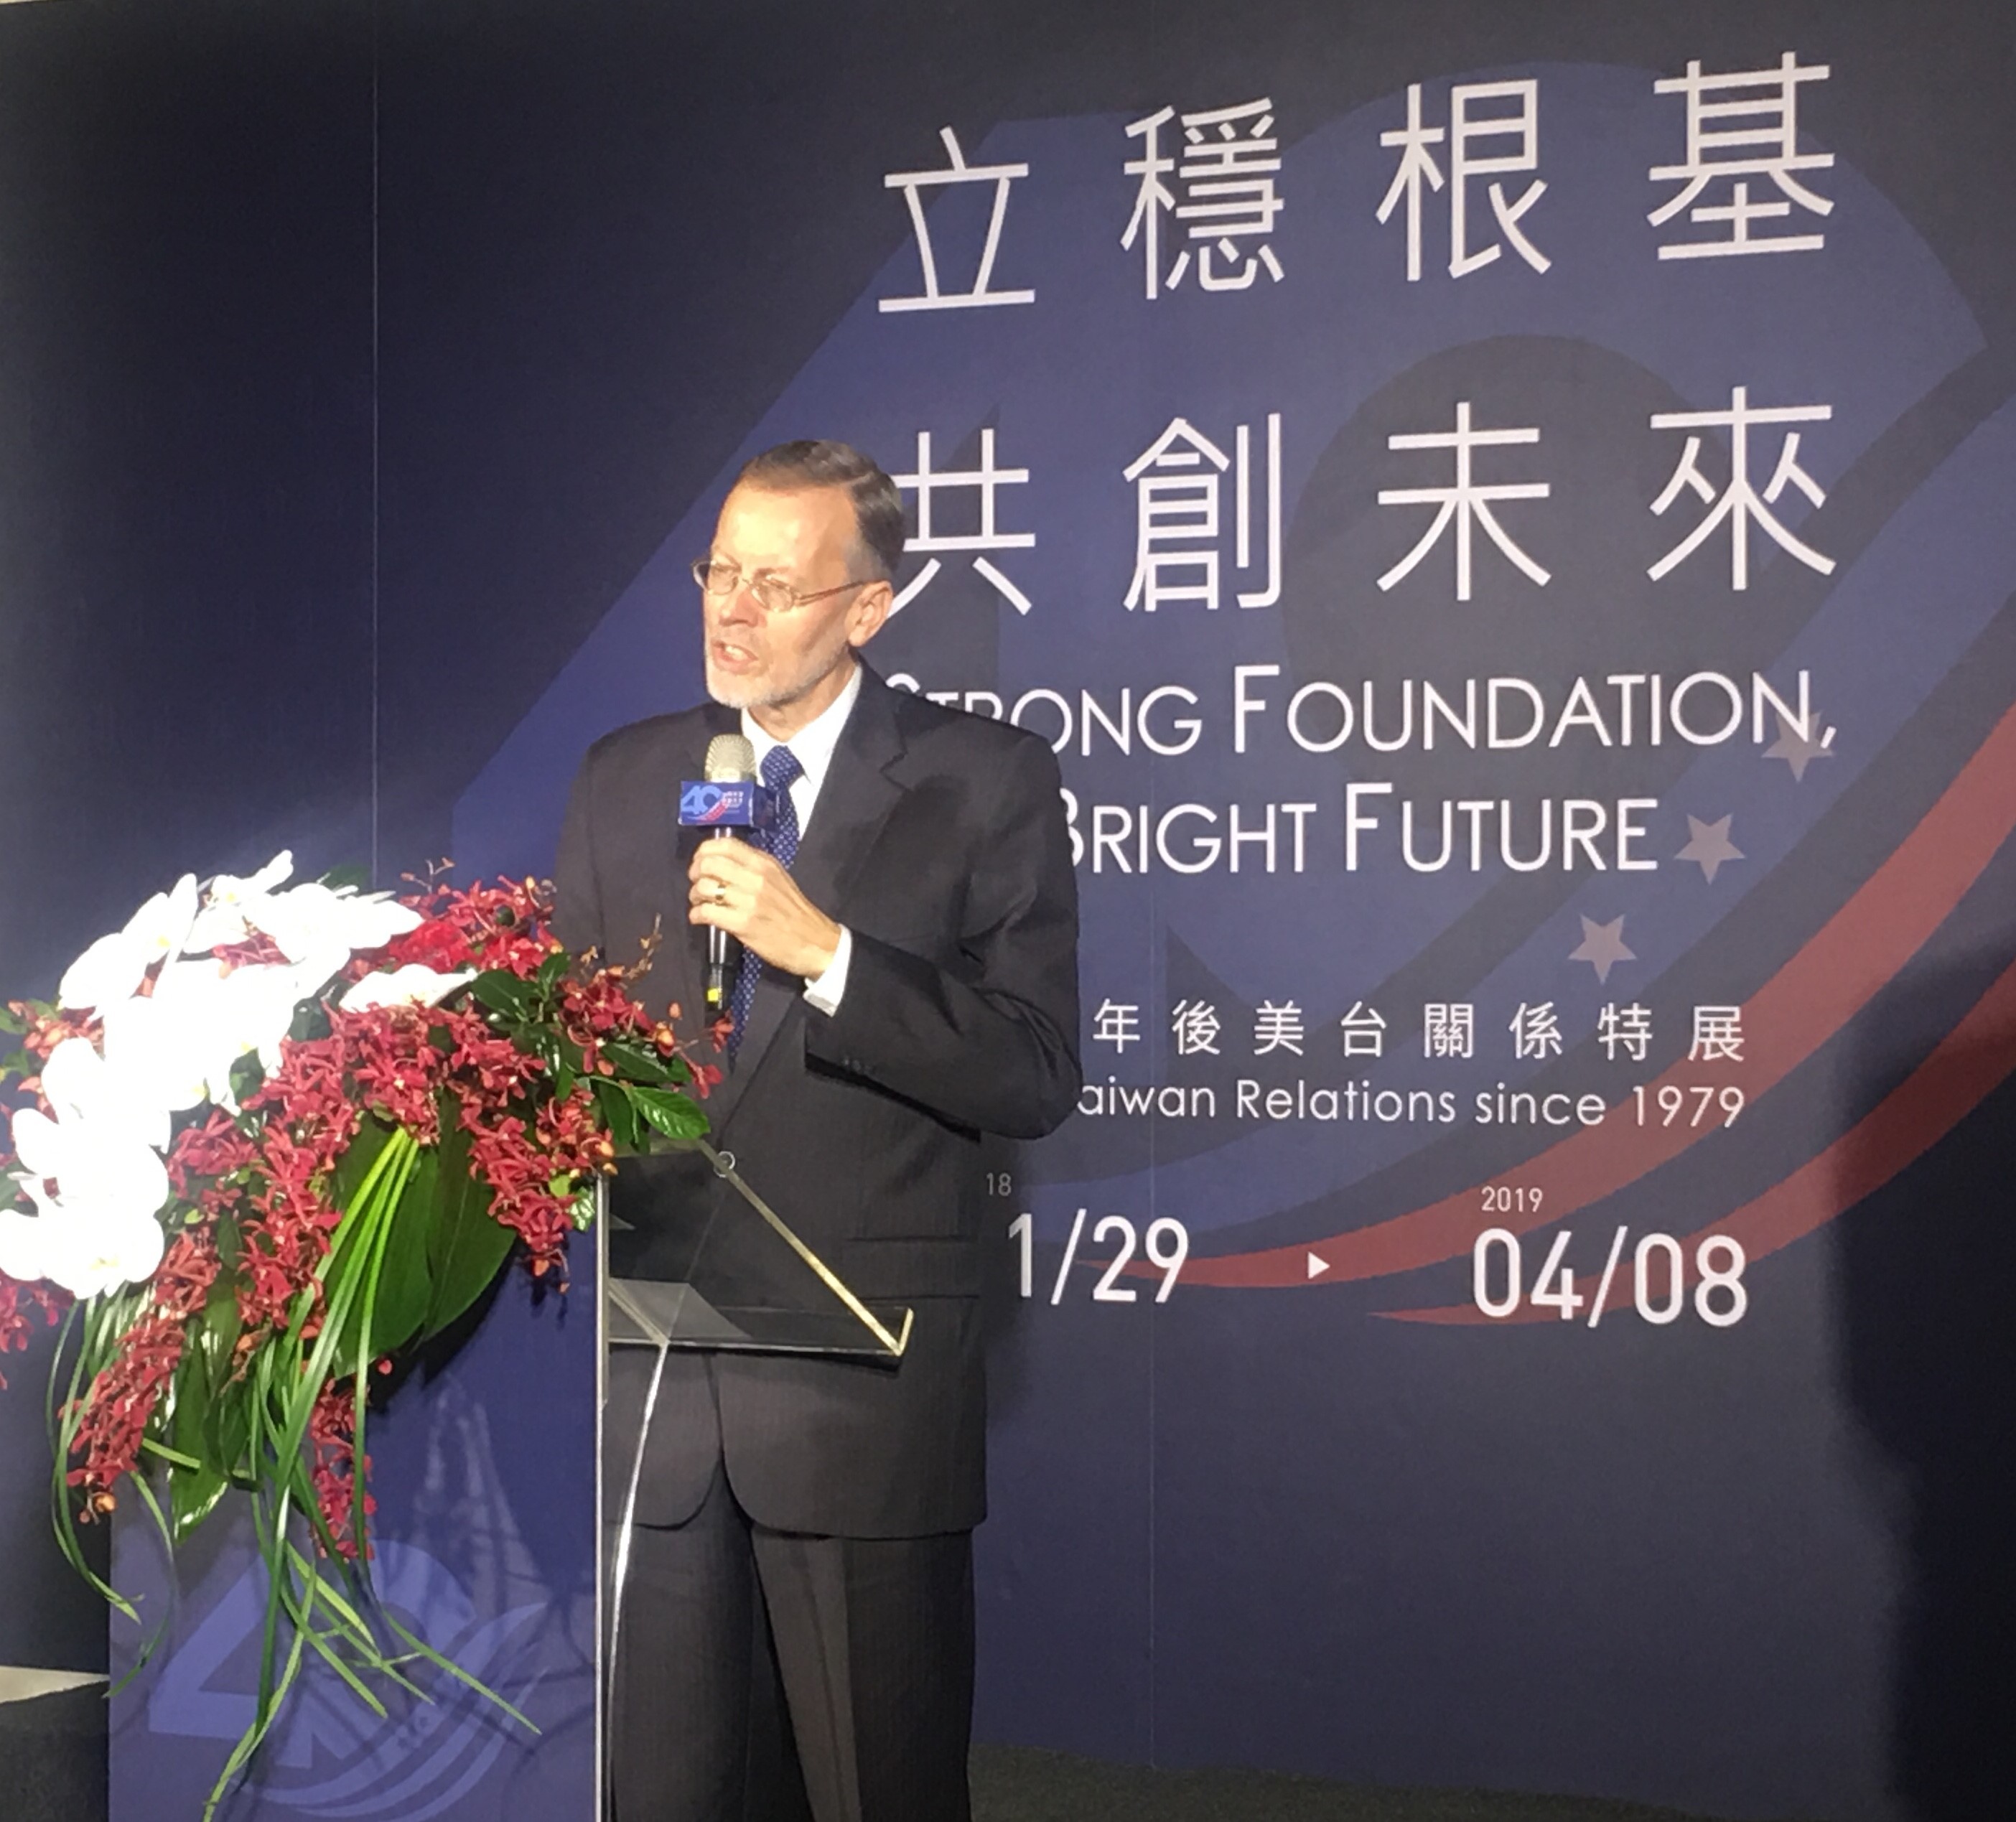 Remarks by AIT Director Brent Christensen at AIT@40 Exhibition Opening in Kaohsiung Remarks by AIT Director Brent Christensen at AIT@40 Exhibition Opening in Kaohsiung